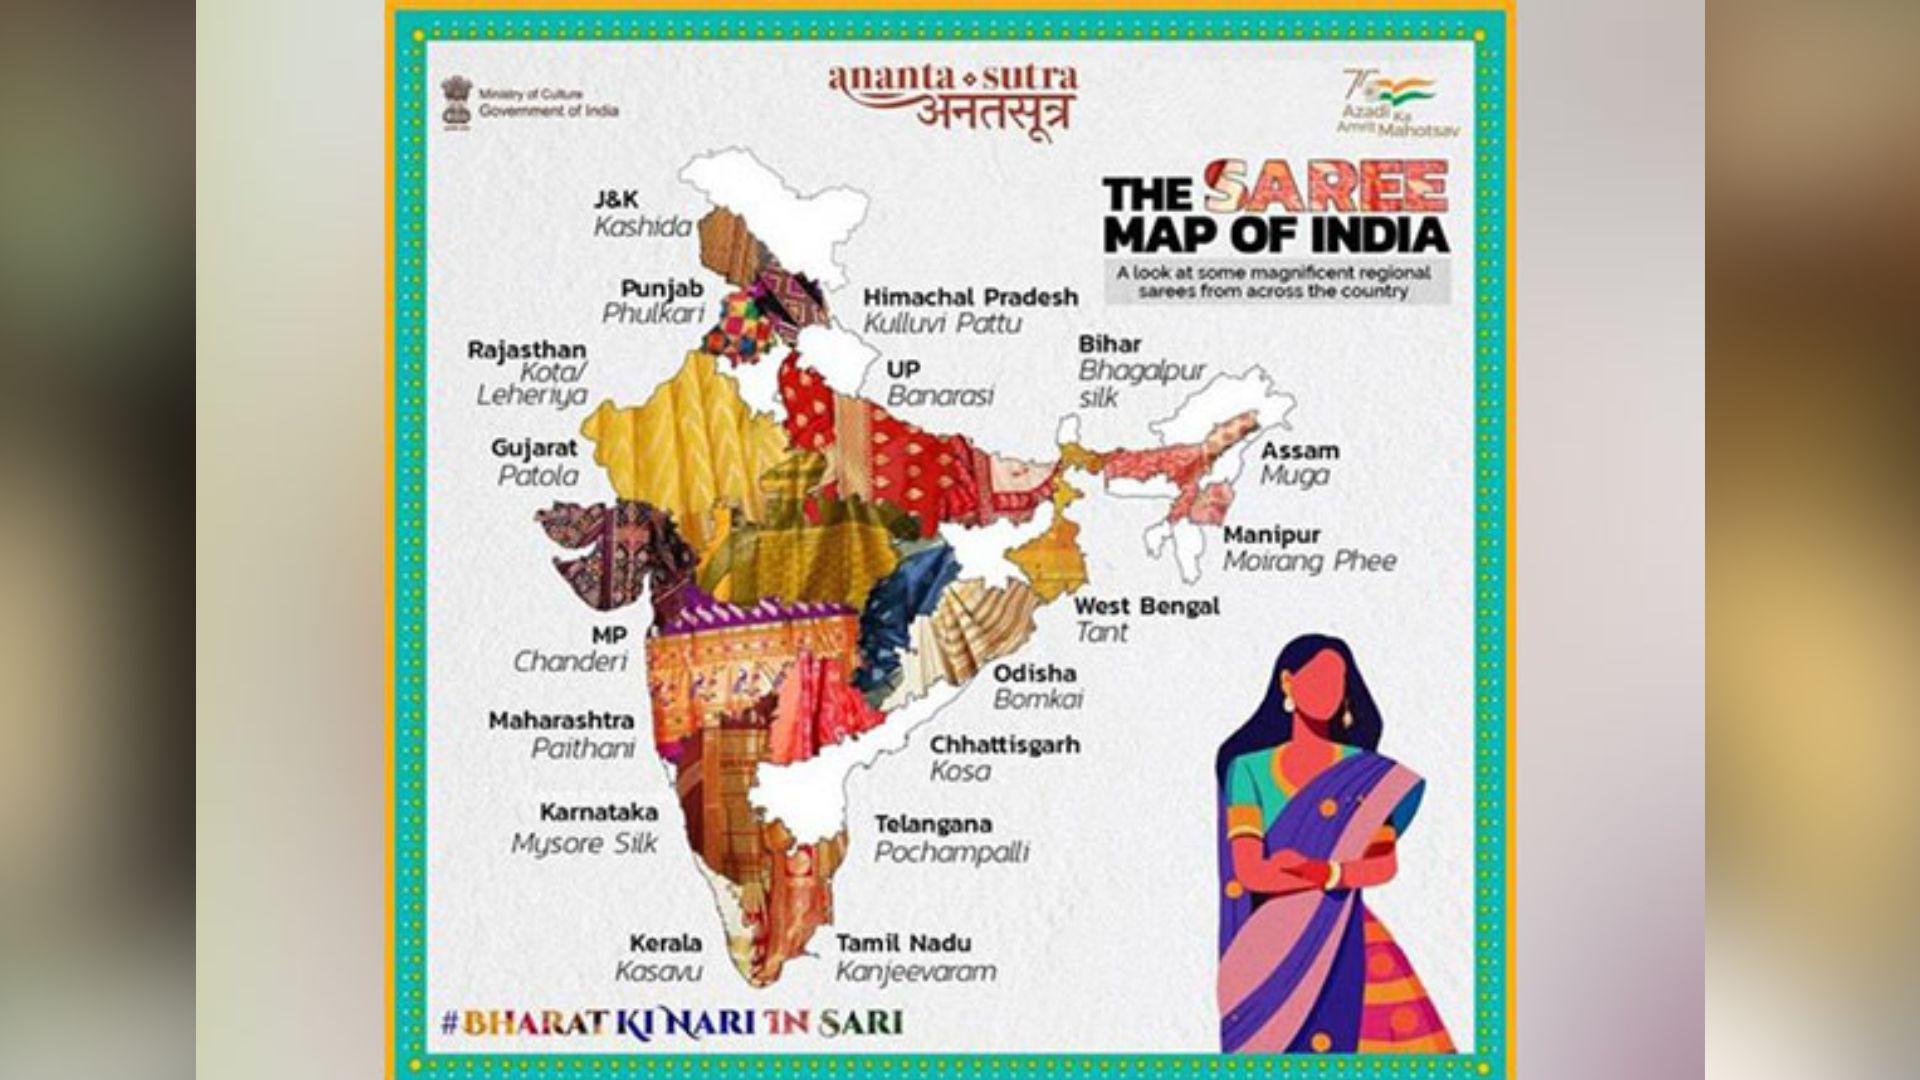 Republic Day Parade to Showcase “Anant Sutra” – A Display of Sarees from Across India